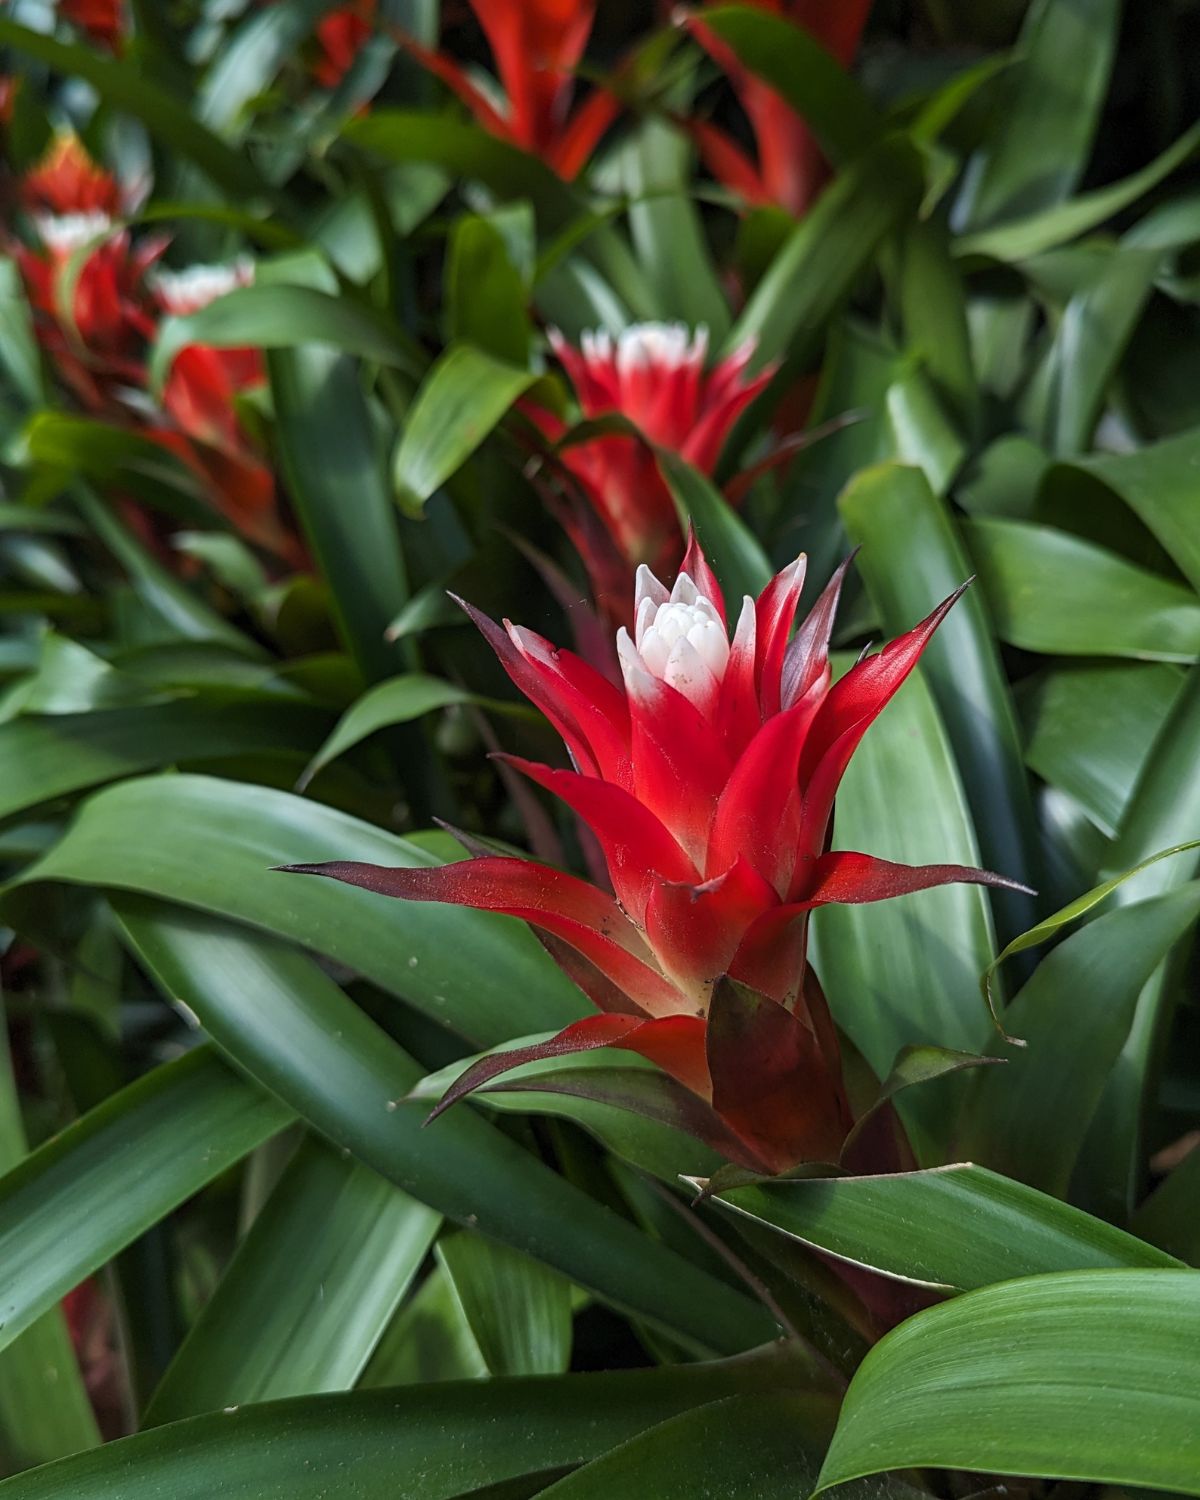 red and white-tipped bloom of a guzmania bromeliad flower